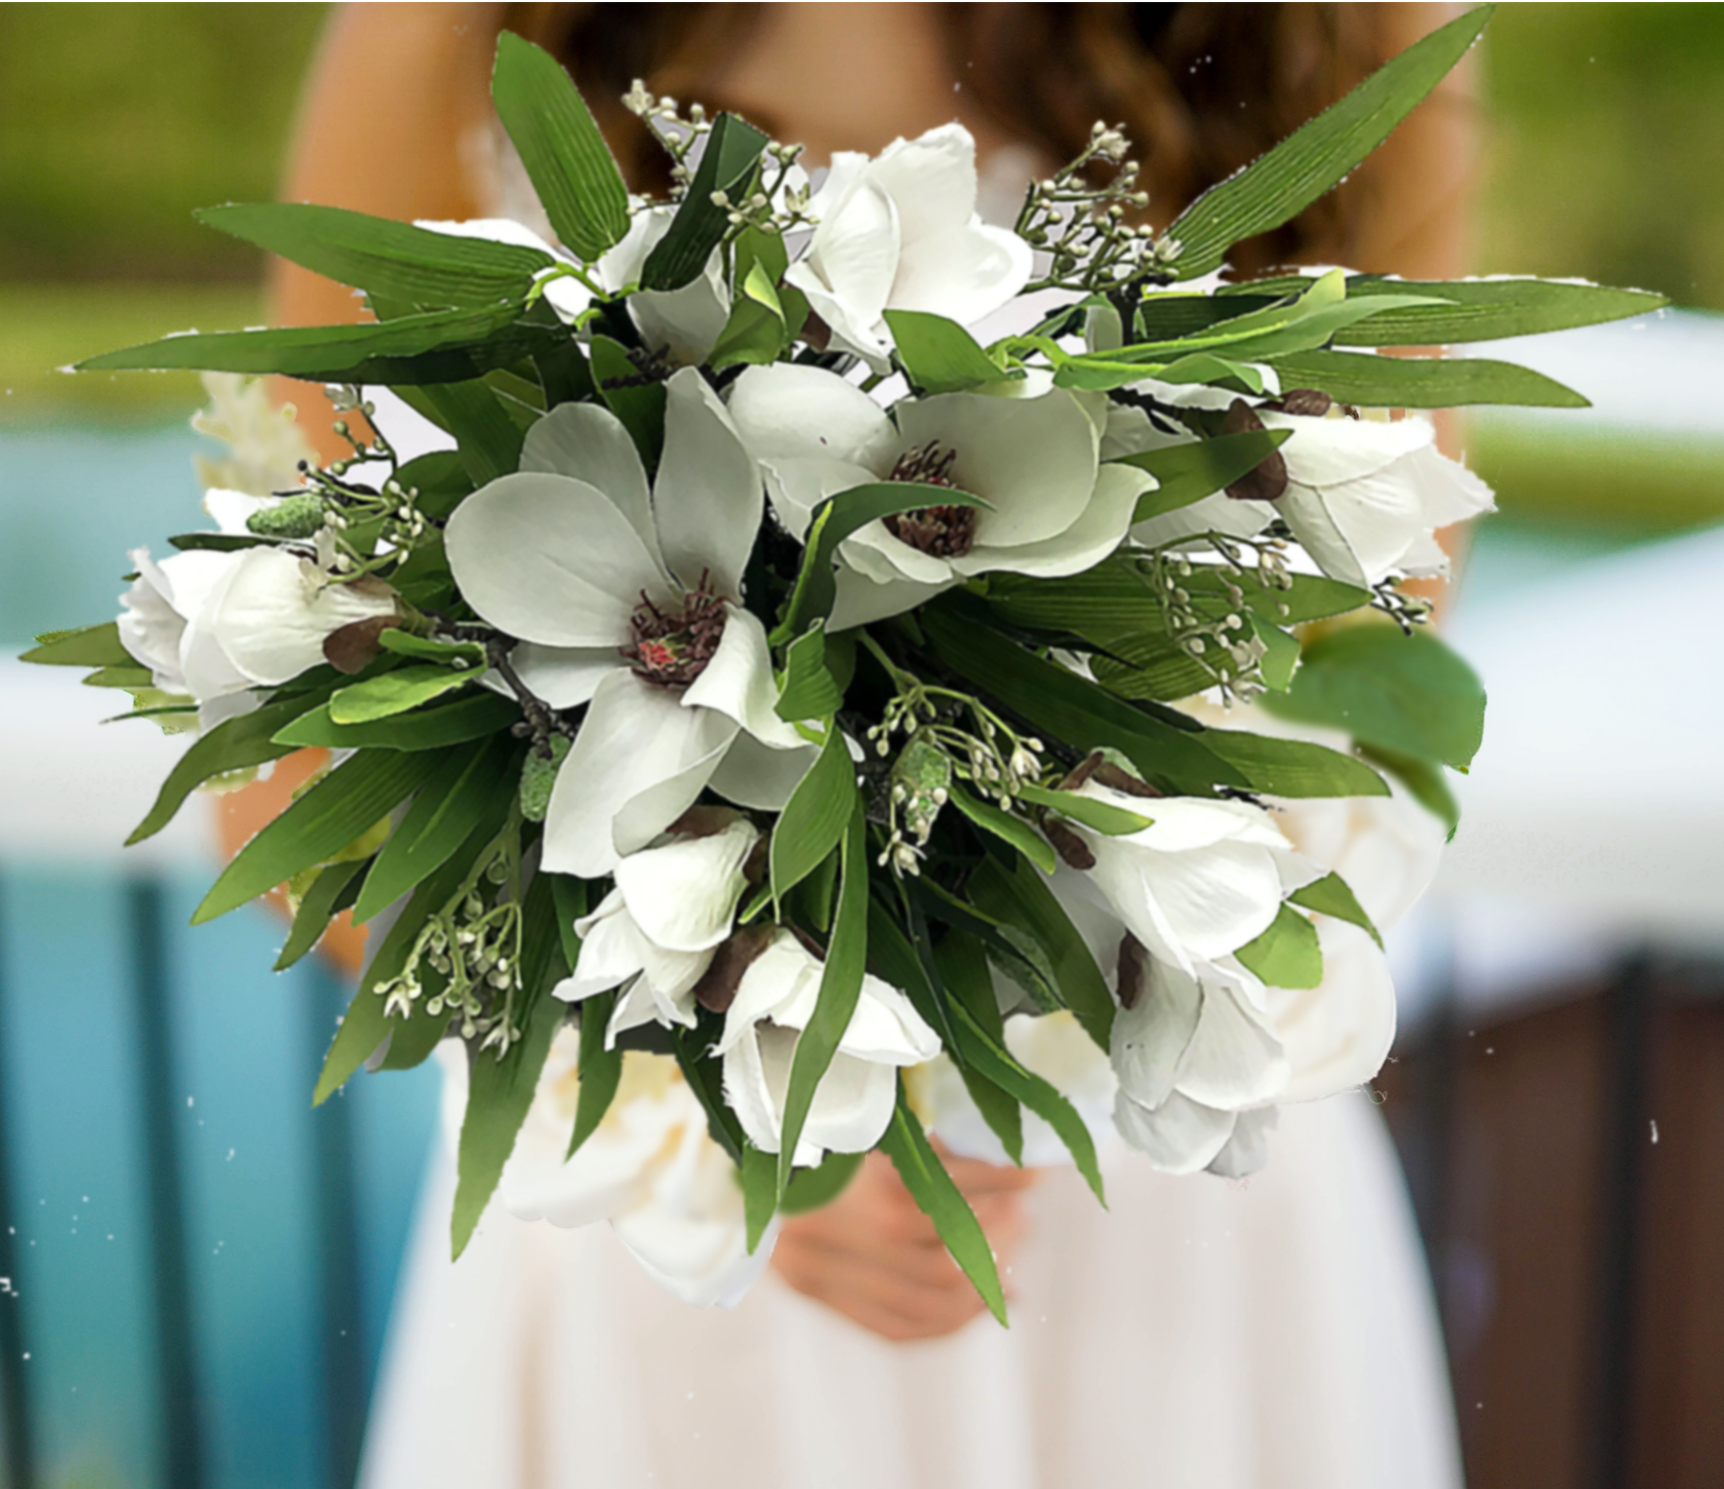 Bouquet of Flowers - Magnolia Greenery